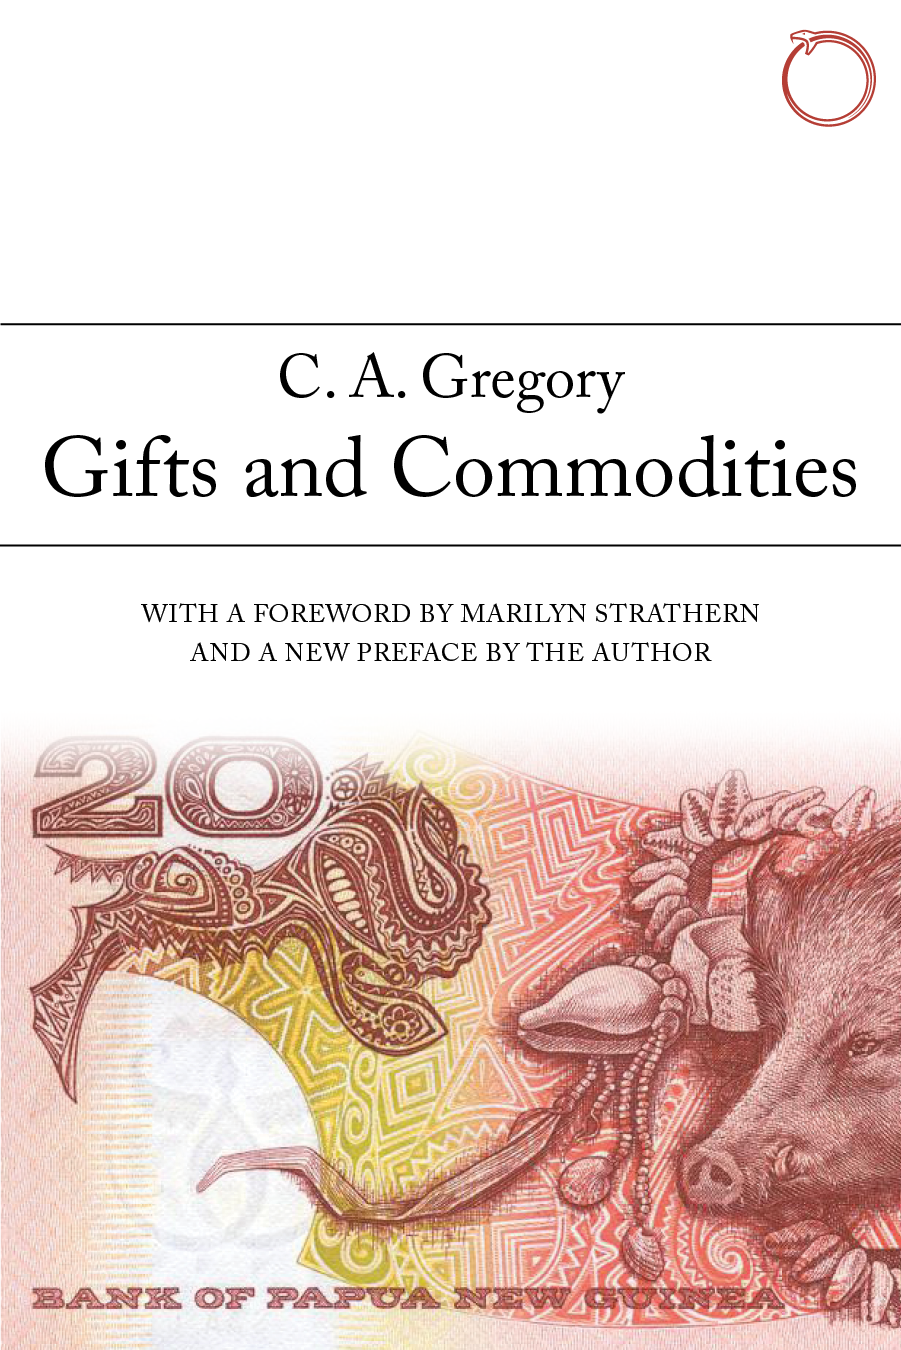 Gifts and Commodities by Chris A. Gregory - HAU Books